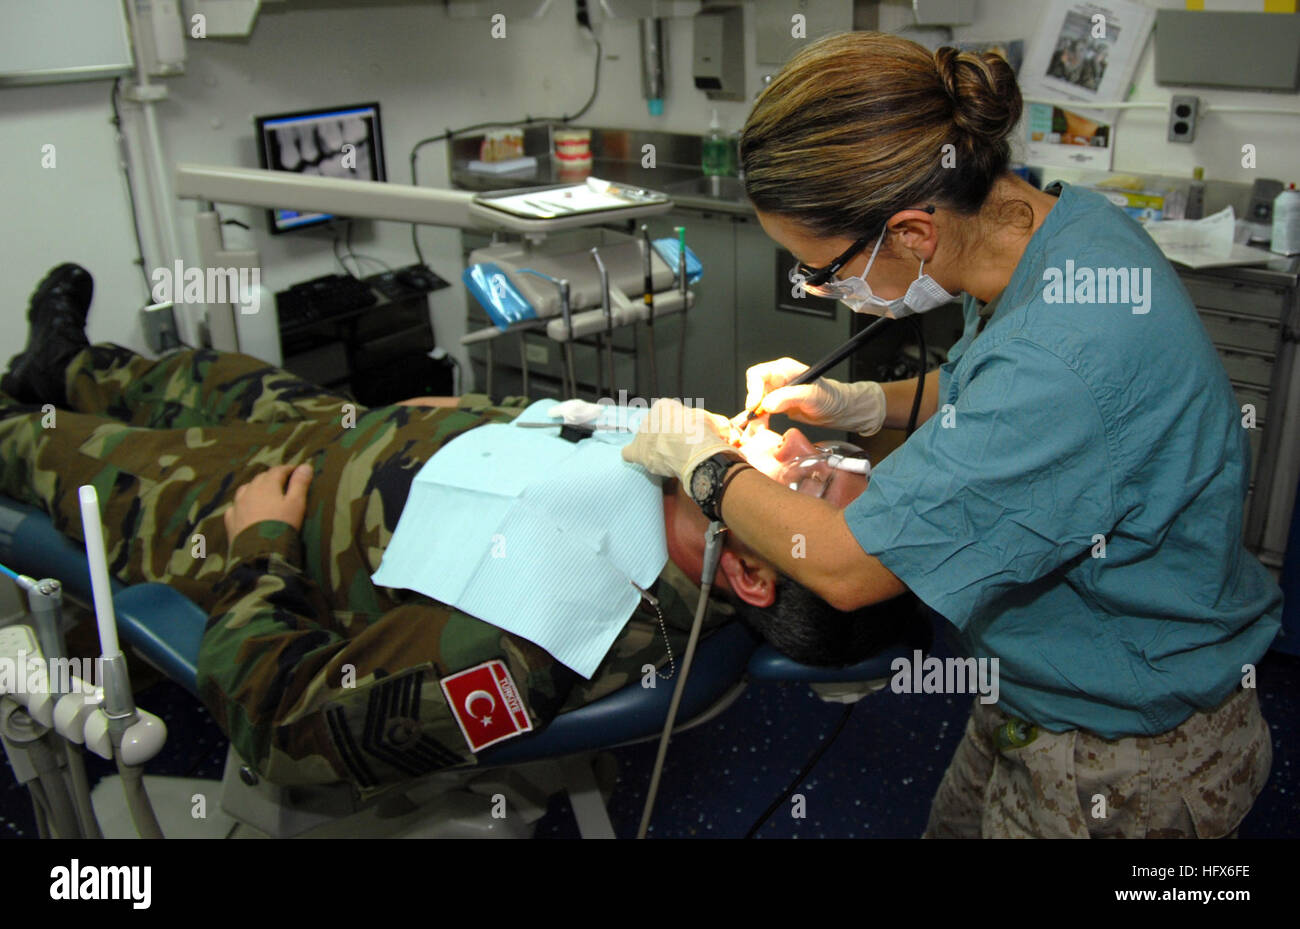 090313-N-9761H-007 PERSIAN GULF (March 13, 2009) Lt. Angela Roldan-Whittaker, dental officer for the 13th Marine Expeditionary Unit embarked aboard the amphibious assault ship USS Boxer (LHD 4), provides a routine dental cleaning for a Turkish master chief petty officer assigned to the Turkish Naval Forces ship TCG Giresun. Boxer is deployed as part of Boxer Amphibious Readiness Group/13th Marine Expeditionary Unit supporting maritime security operations in the U.S. 5th Fleet area of responsibility. (U.S. Navy photo by Mass Communication Specialist 2nd Class Jeff Hopkins/Released) US Navy 0903 Stock Photo